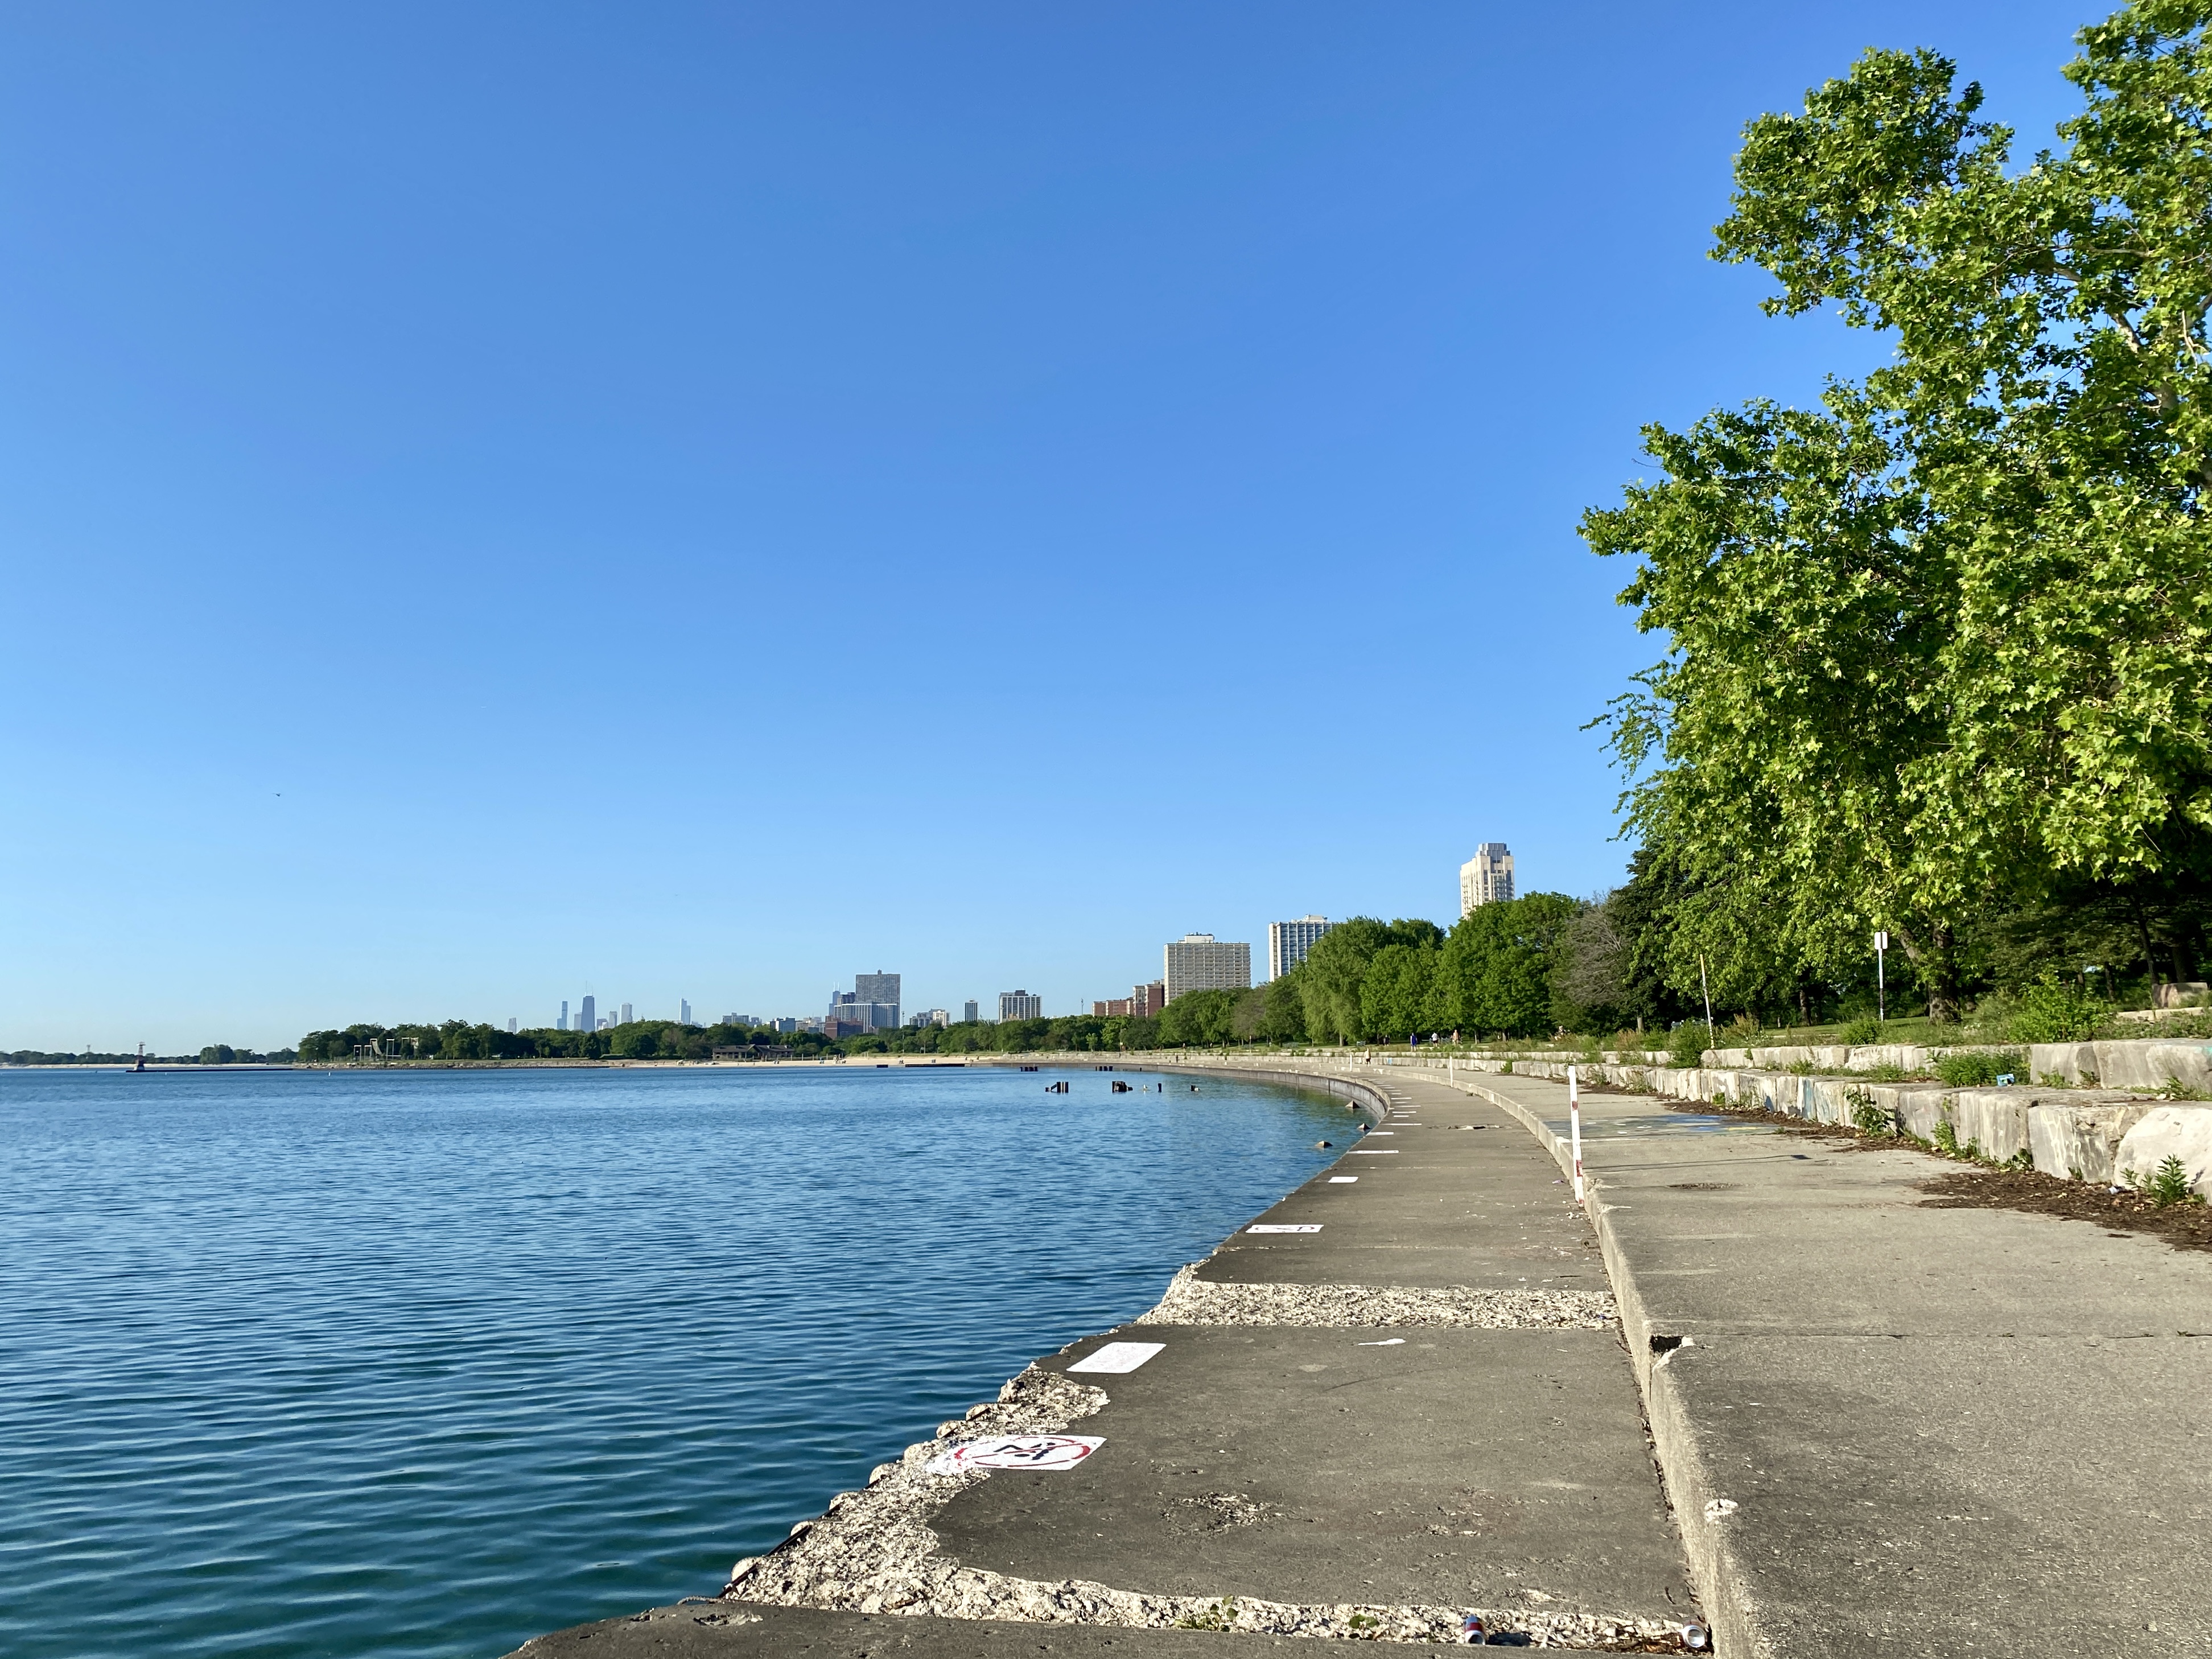 Bright blue sky over a concrete walkway curving around a bright blue lake, a large green tree to the right and in the left distance the Chicago skyline